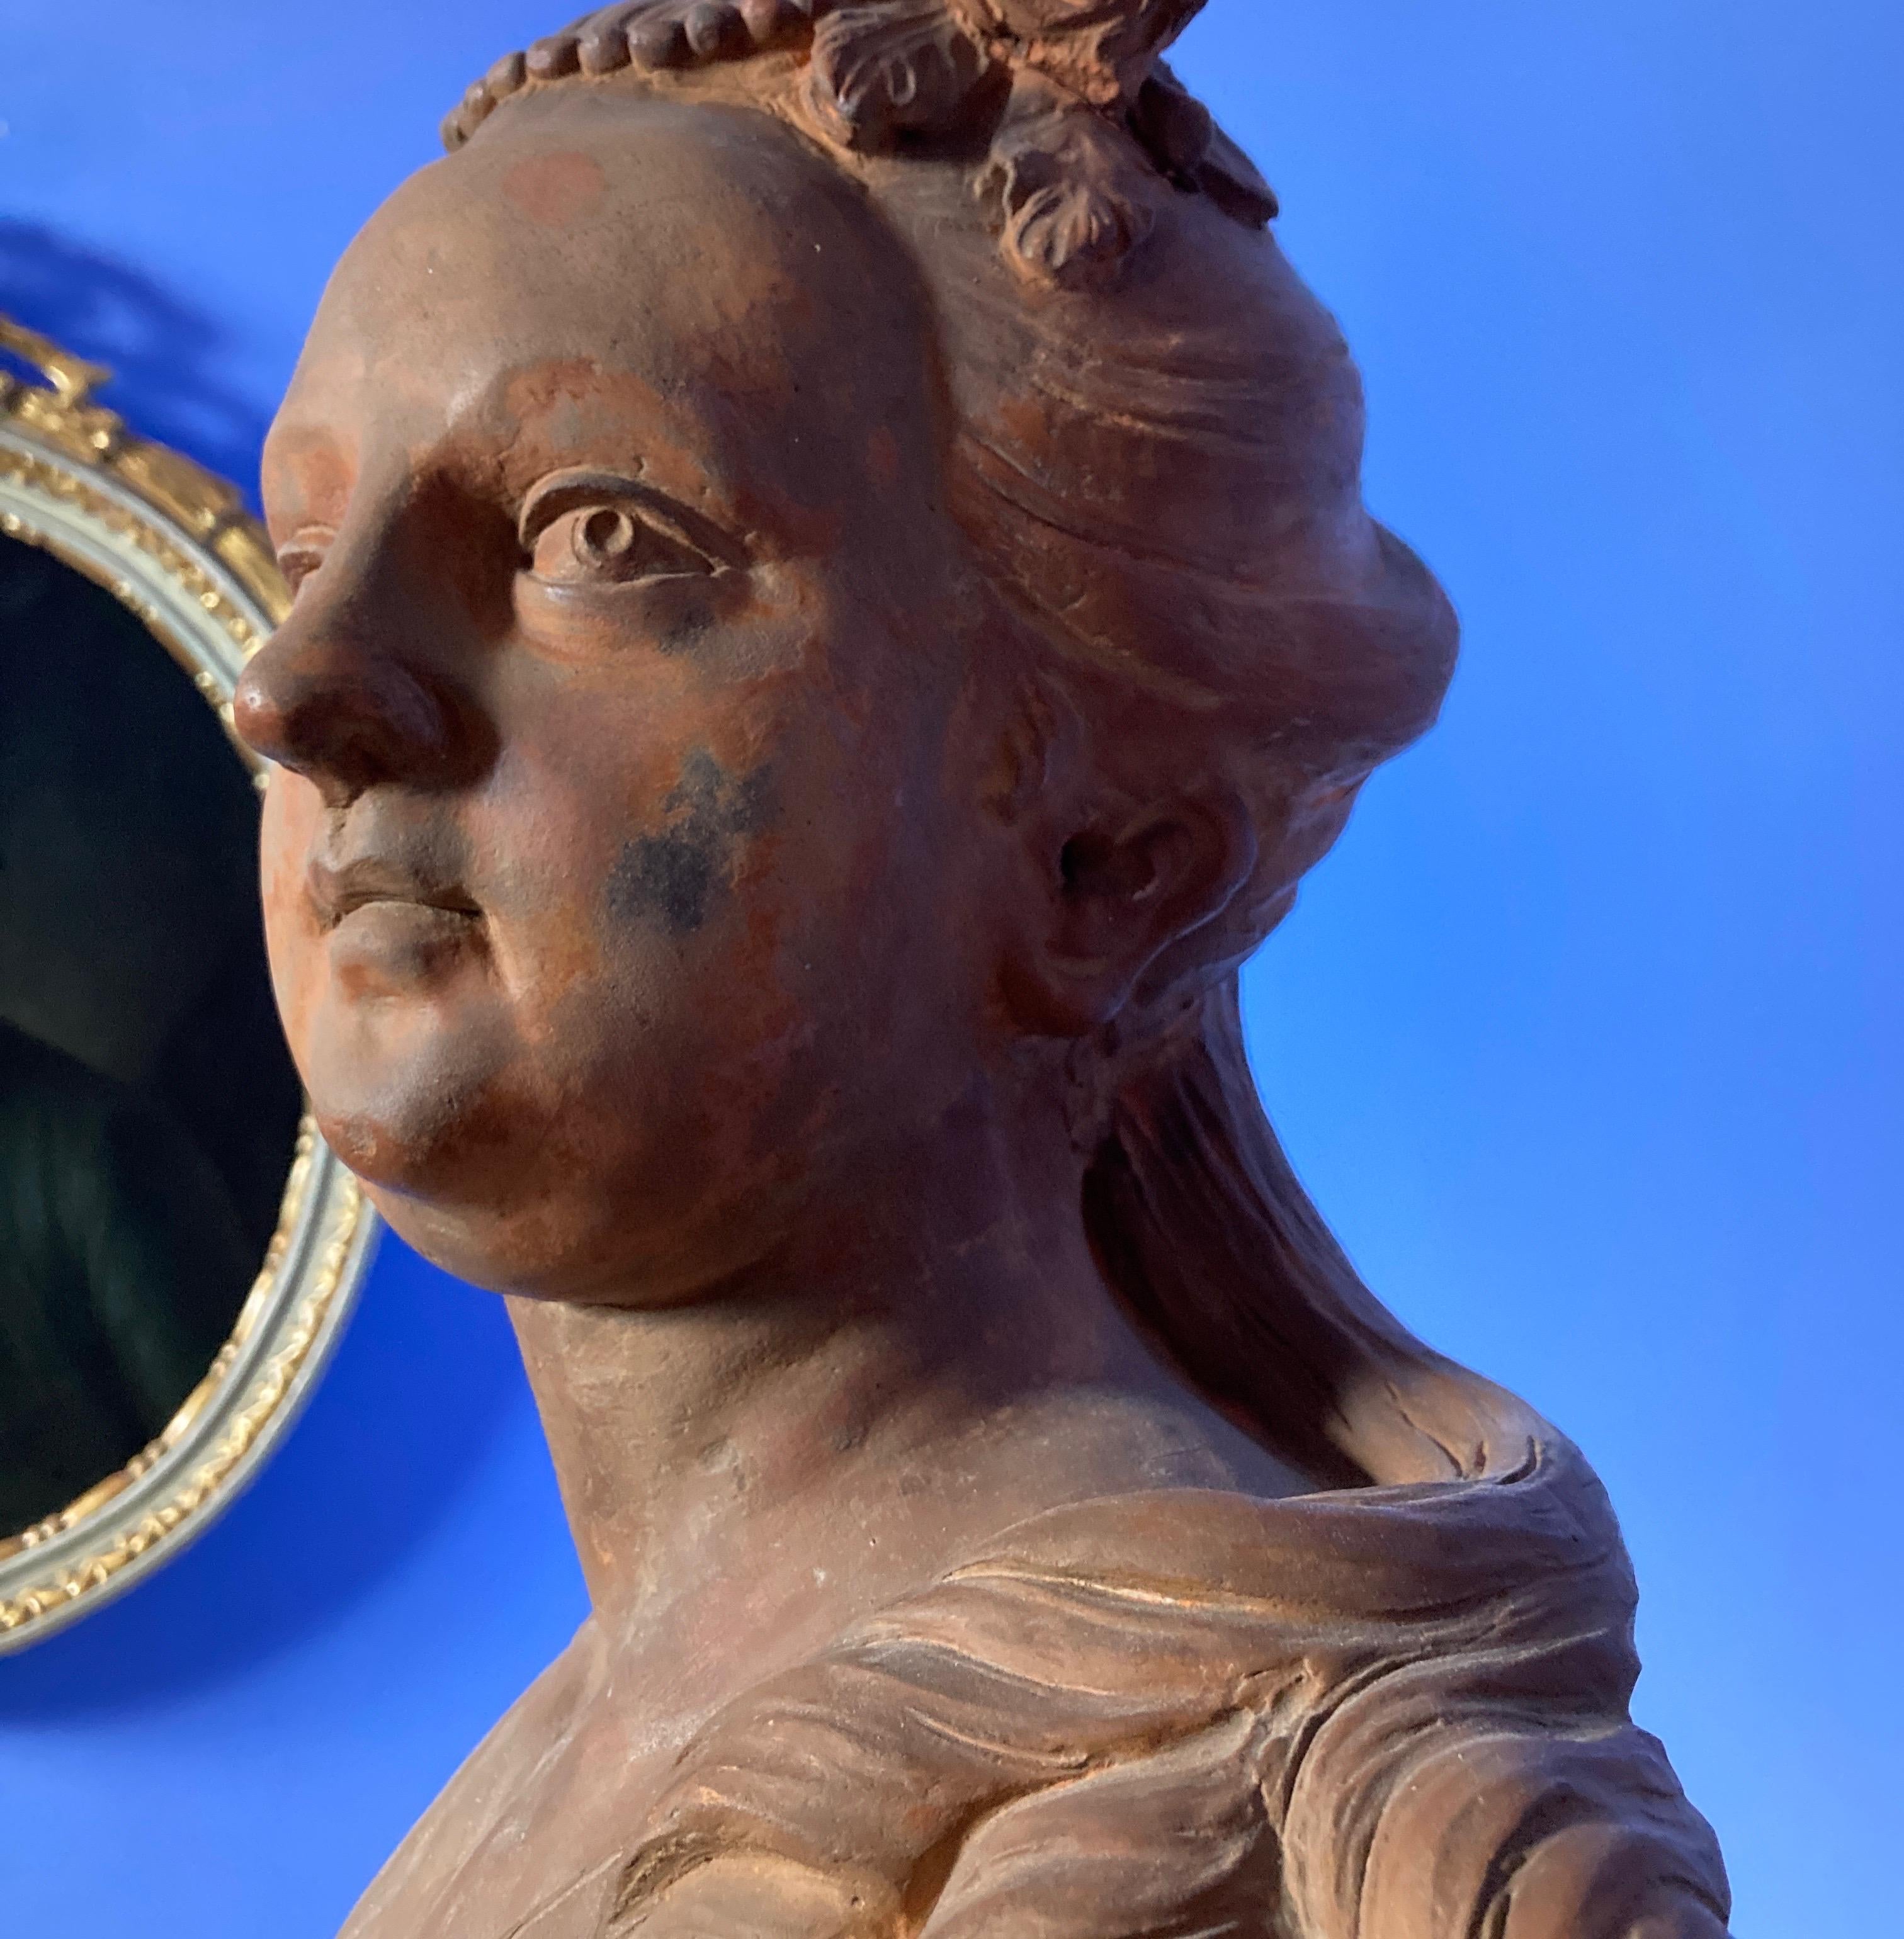 Bust of a Lady, prob Queen Elisabeth Petrowna, Terracotta Sculpture, Baroque Art - Blue Figurative Sculpture by Unknown